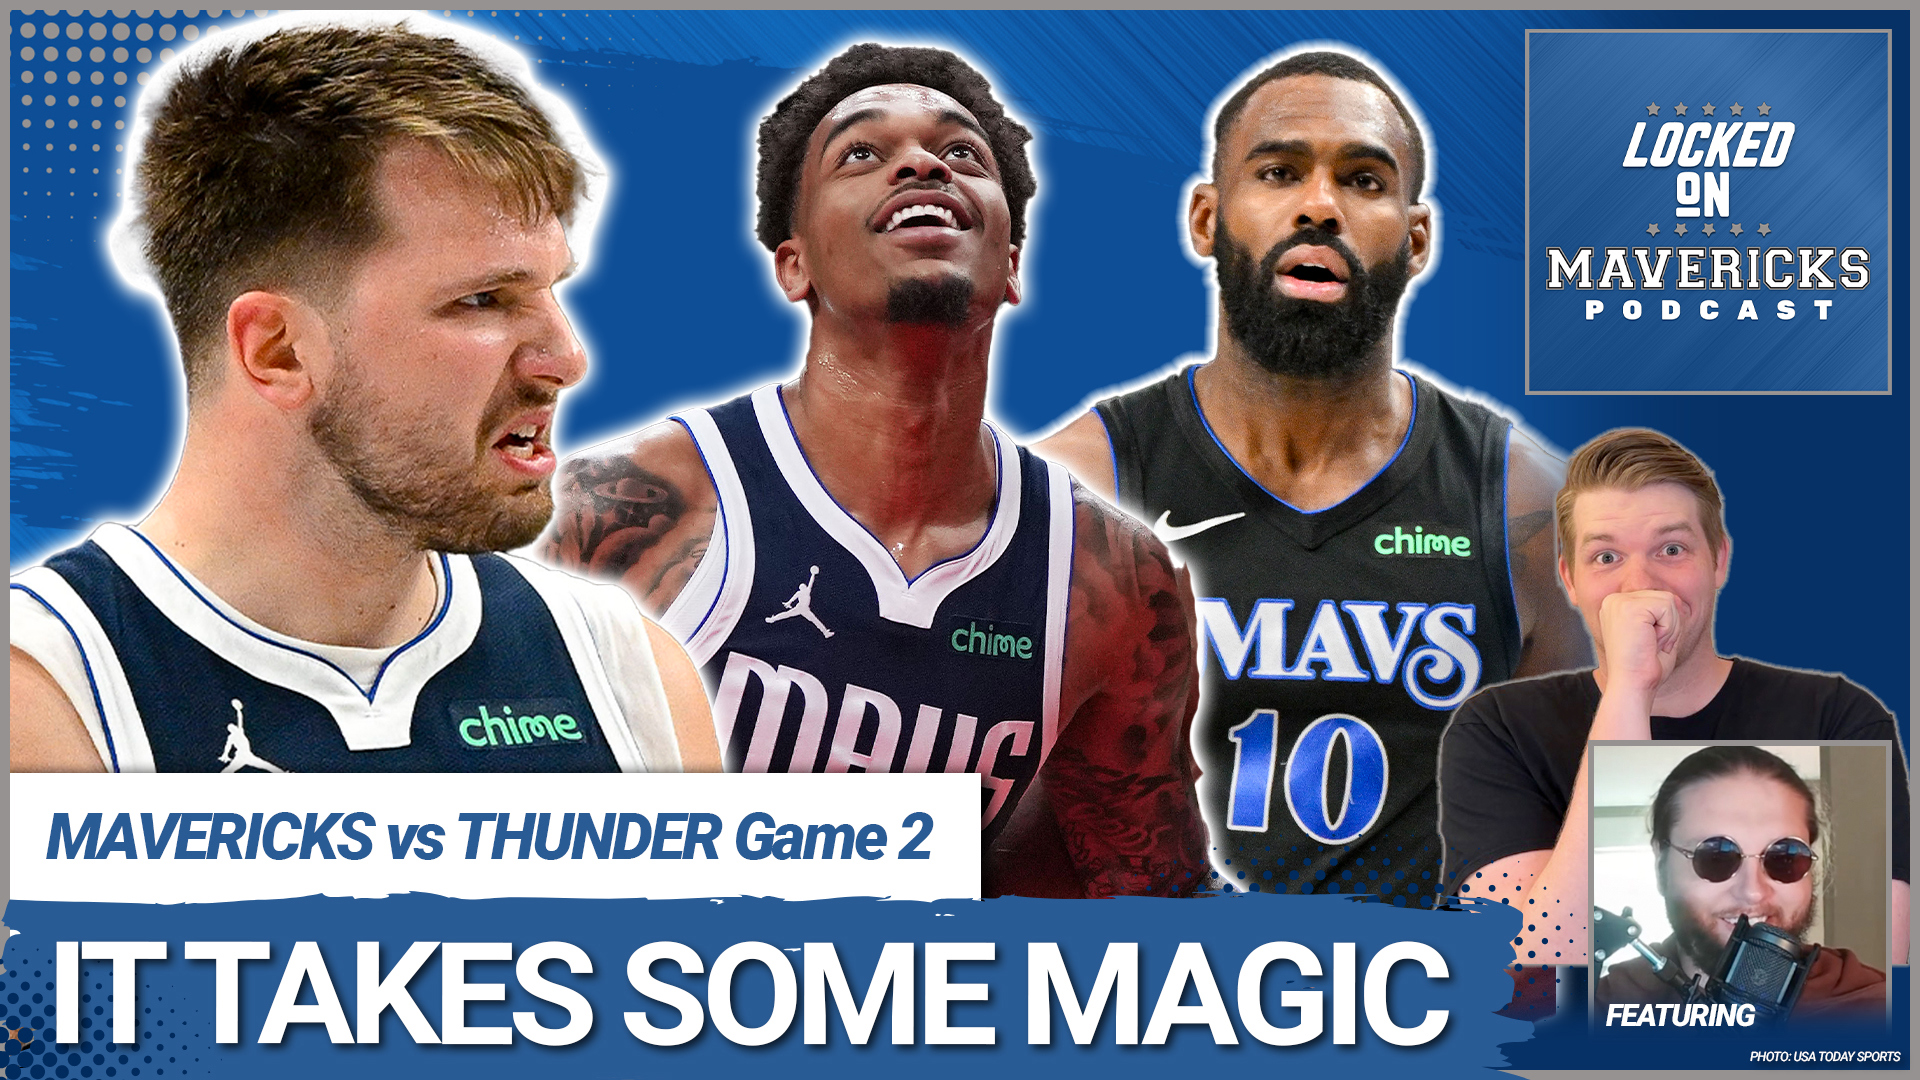 Nick Angstadt & Slightly Biased breakdown the Dallas Mavericks' Game 2 win over the Oklahoma City Thunder. What did Luka Doncic give role players confidence?